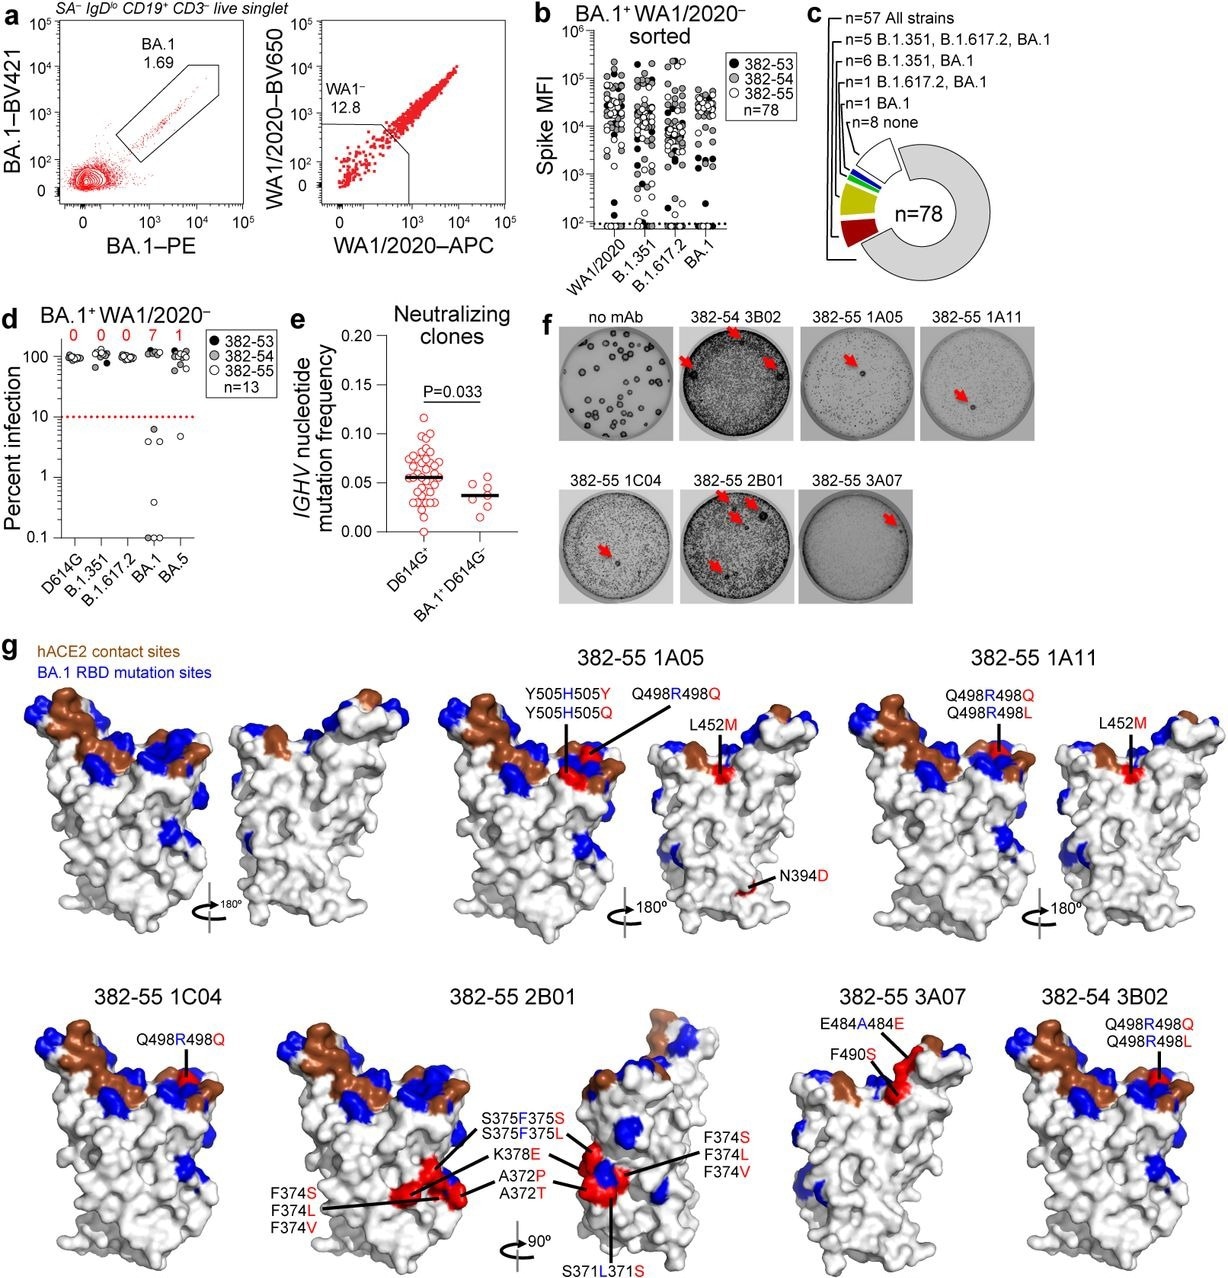 Characterization of BA.1-specific mAbs. (a) Gating strategy for sorting BA.1+ WA1/2020− MBC from 17 weeks post-boost PBMC. (b) Binding of mAbs from BA.1+ WA1/2020− sorted MBCs to indicated strains of SARS-CoV-2 S measured by multiplex bead binding array. (c) Summary of mAb binding. (d) Neutralizing activity of BA.1+ WA1/2020− binding mAbs against indicated strains of authentic SARS-CoV-2 virus. Numbers above each virus are of mAbs below the 90% infection reduction threshold. (e) IGHV mutation frequencies of clones related to mAbs from participants 382-54 and 382-55 that neutralized D164G (left) and BA.1 but not D614G (right). Black lines indicate medians. Each symbol represents a sequence; n = 39 for D614G+ and n = 7 for BA.1+ D614G−. (f) Plaque assays on Vero E6 cells with indicated mAb in the overlay to isolate escape mutants (red arrows). Images are representative of three experiments per mAb. (g) Structure of RBD with hACE2 footprint highlighted in brown, BA.1 mutations highlighted in blue, and amino acids whose substitution confers resistance to indicated mAbs in plaque assays highlighted in red.